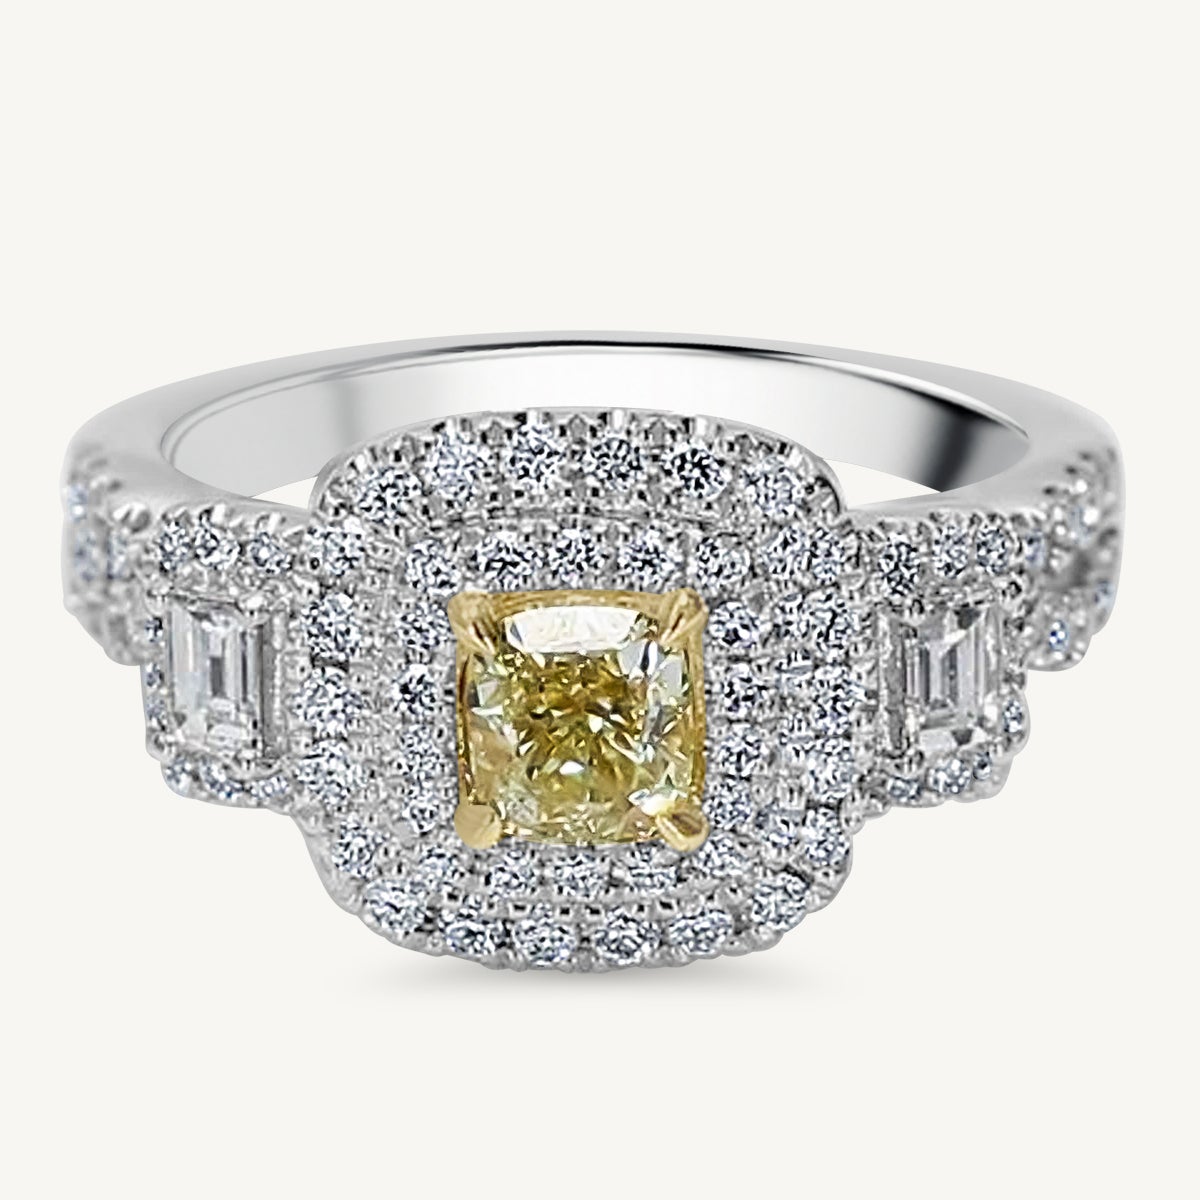 Natural Yellow Cushion and White Diamond 1.26 Carat TW Gold Cocktail Ring